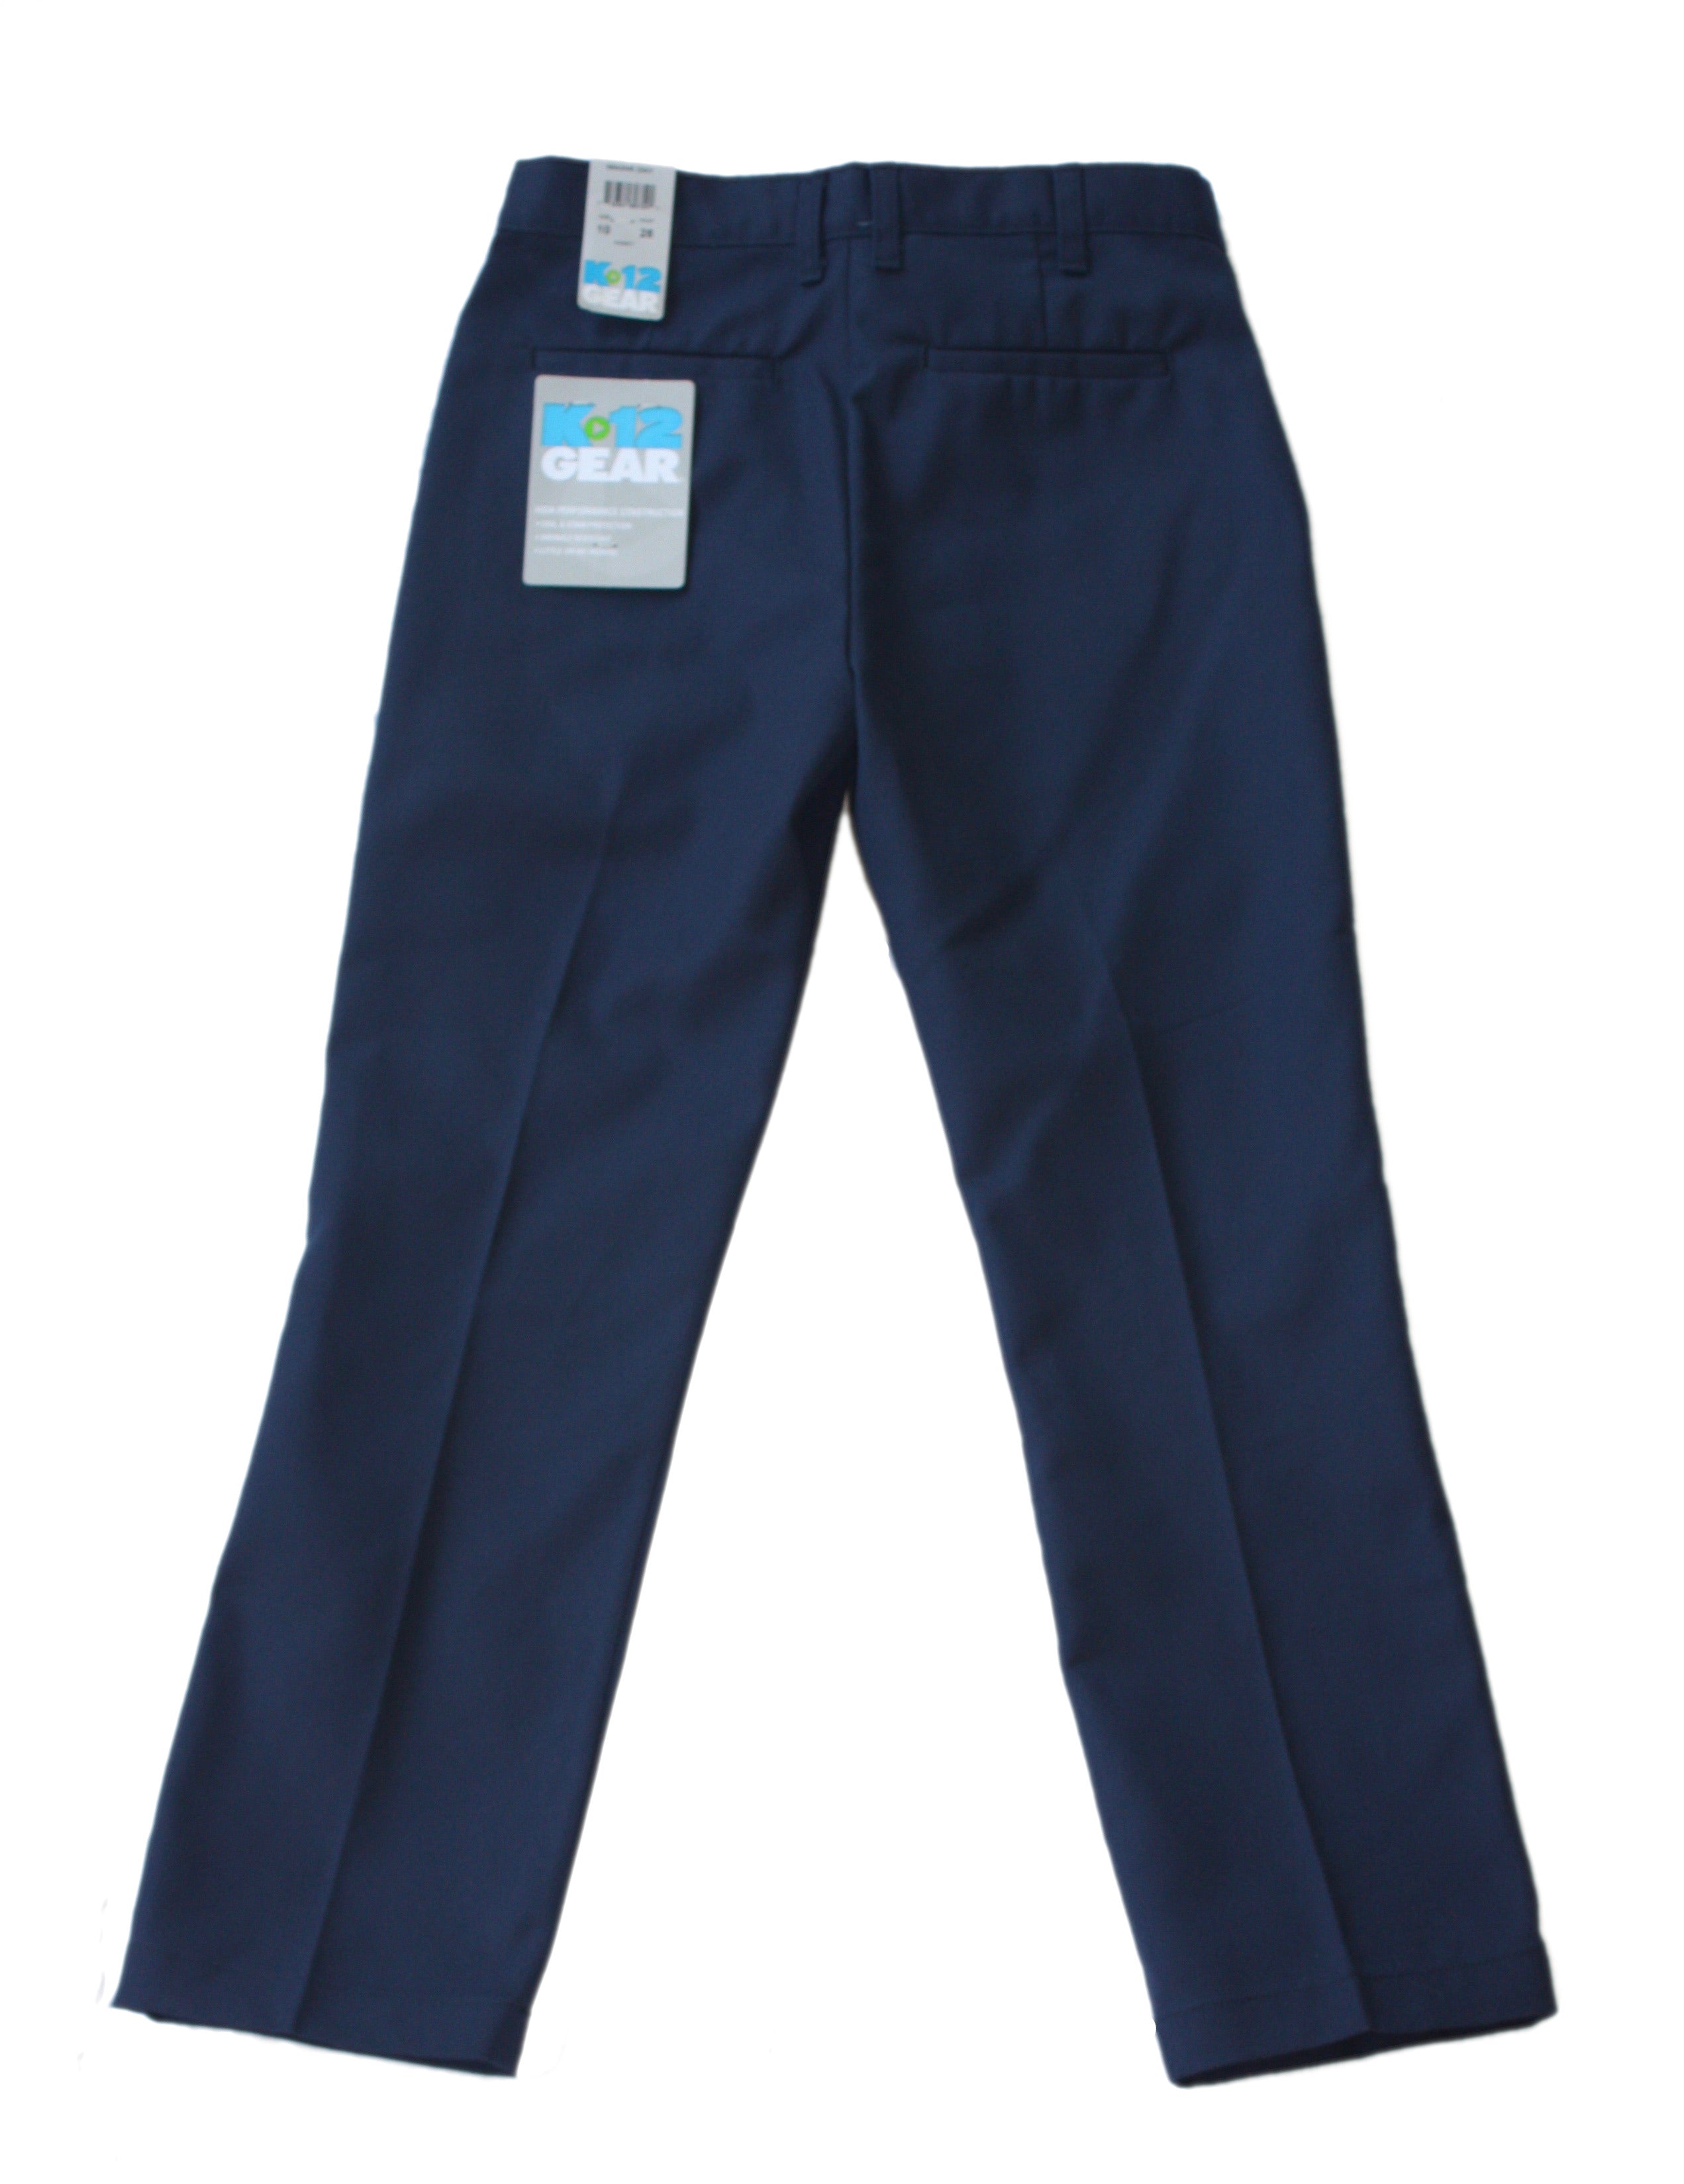 Boys Belted Woven Chino Pants with Stain and Wrinkle Resistance 2-Pack -  Uniform | Gymboree - NAVY SLATE